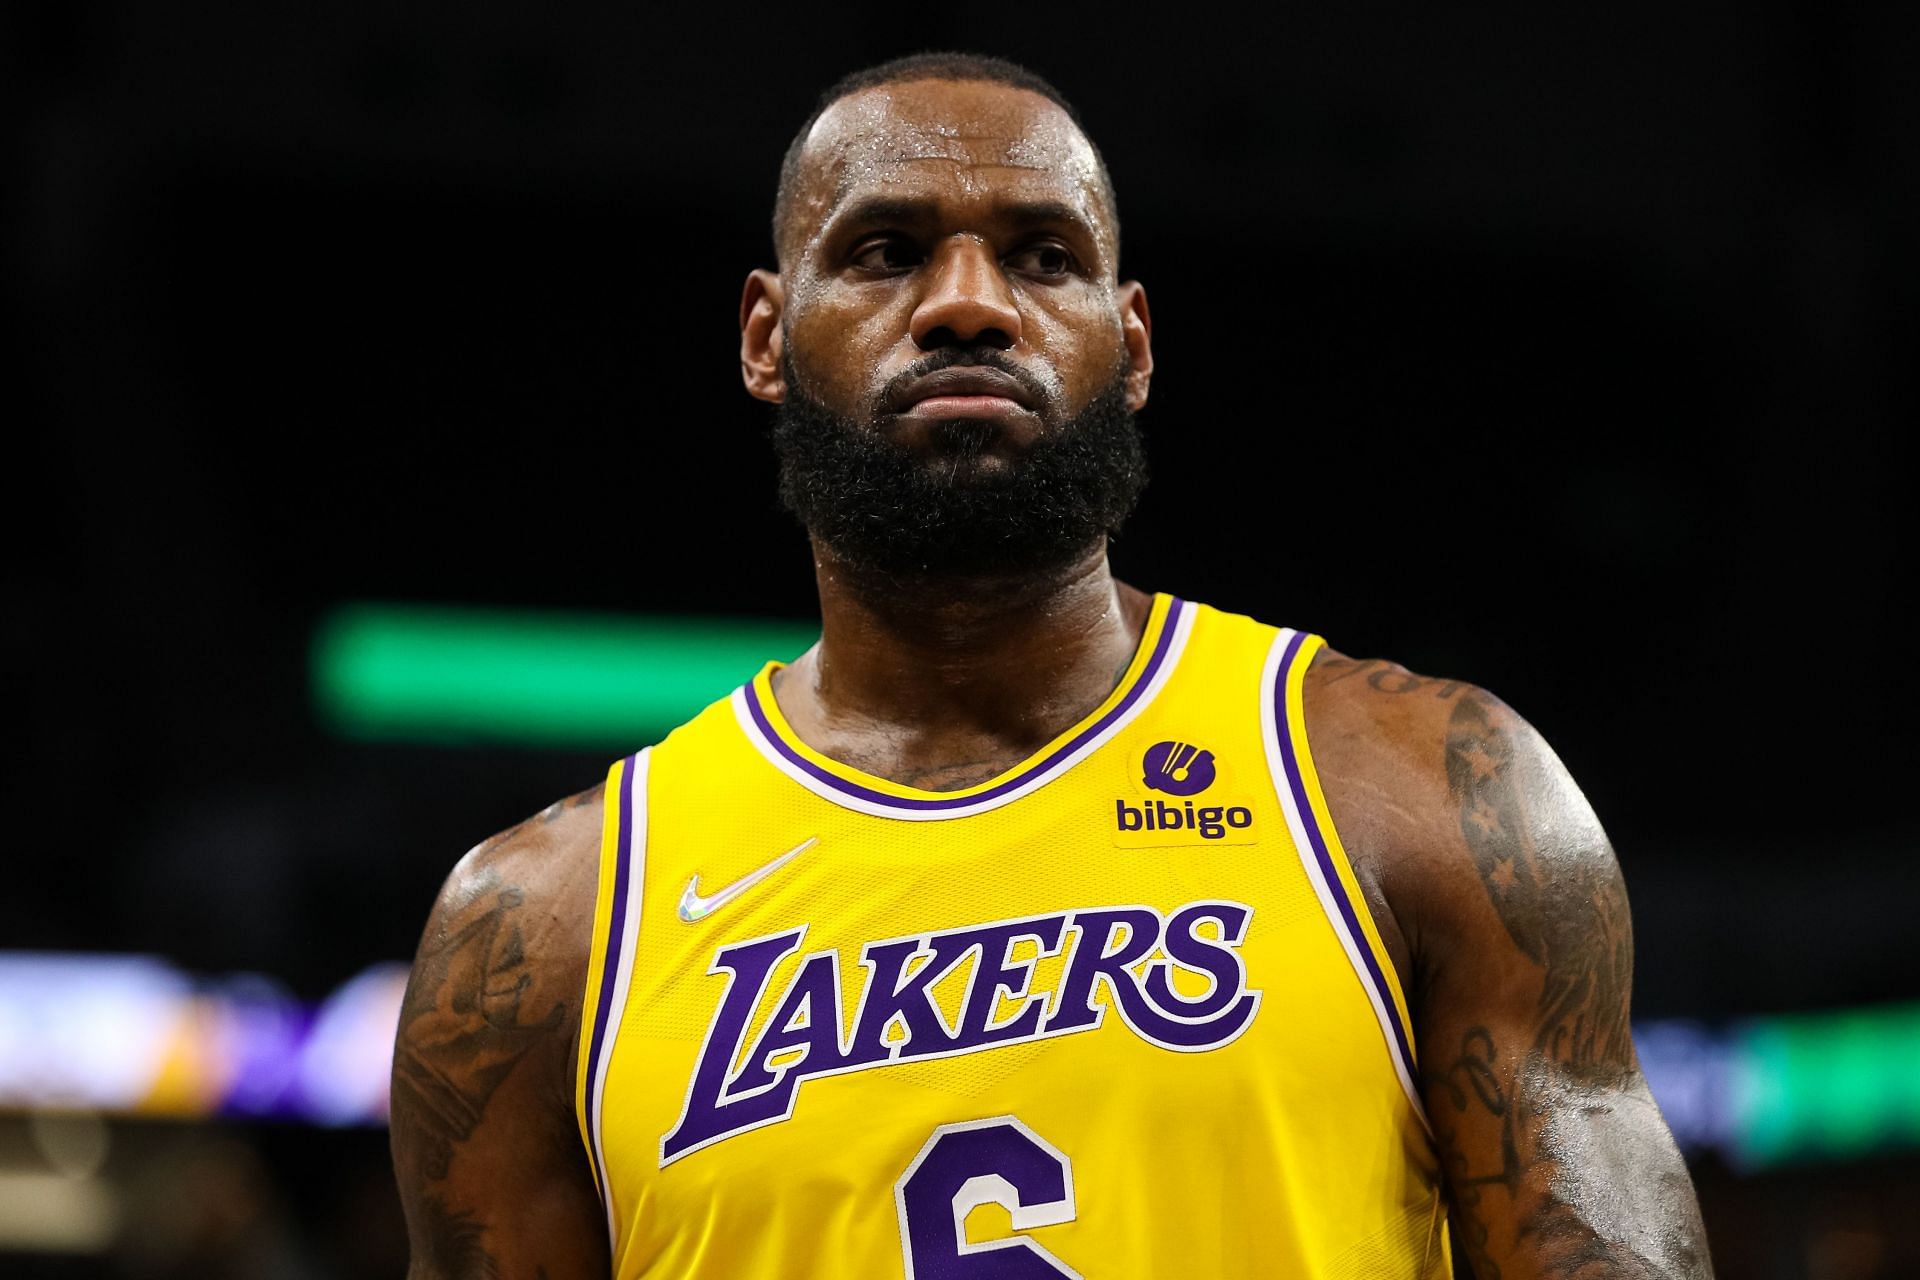 LeBron James of the LA Lakers looks on against the Minnesota Timberwolves in the third quarter on Dec. 17, 2021, in Minneapolis, Minnesota. The Timberwolves defeated the Lakers 110-92.